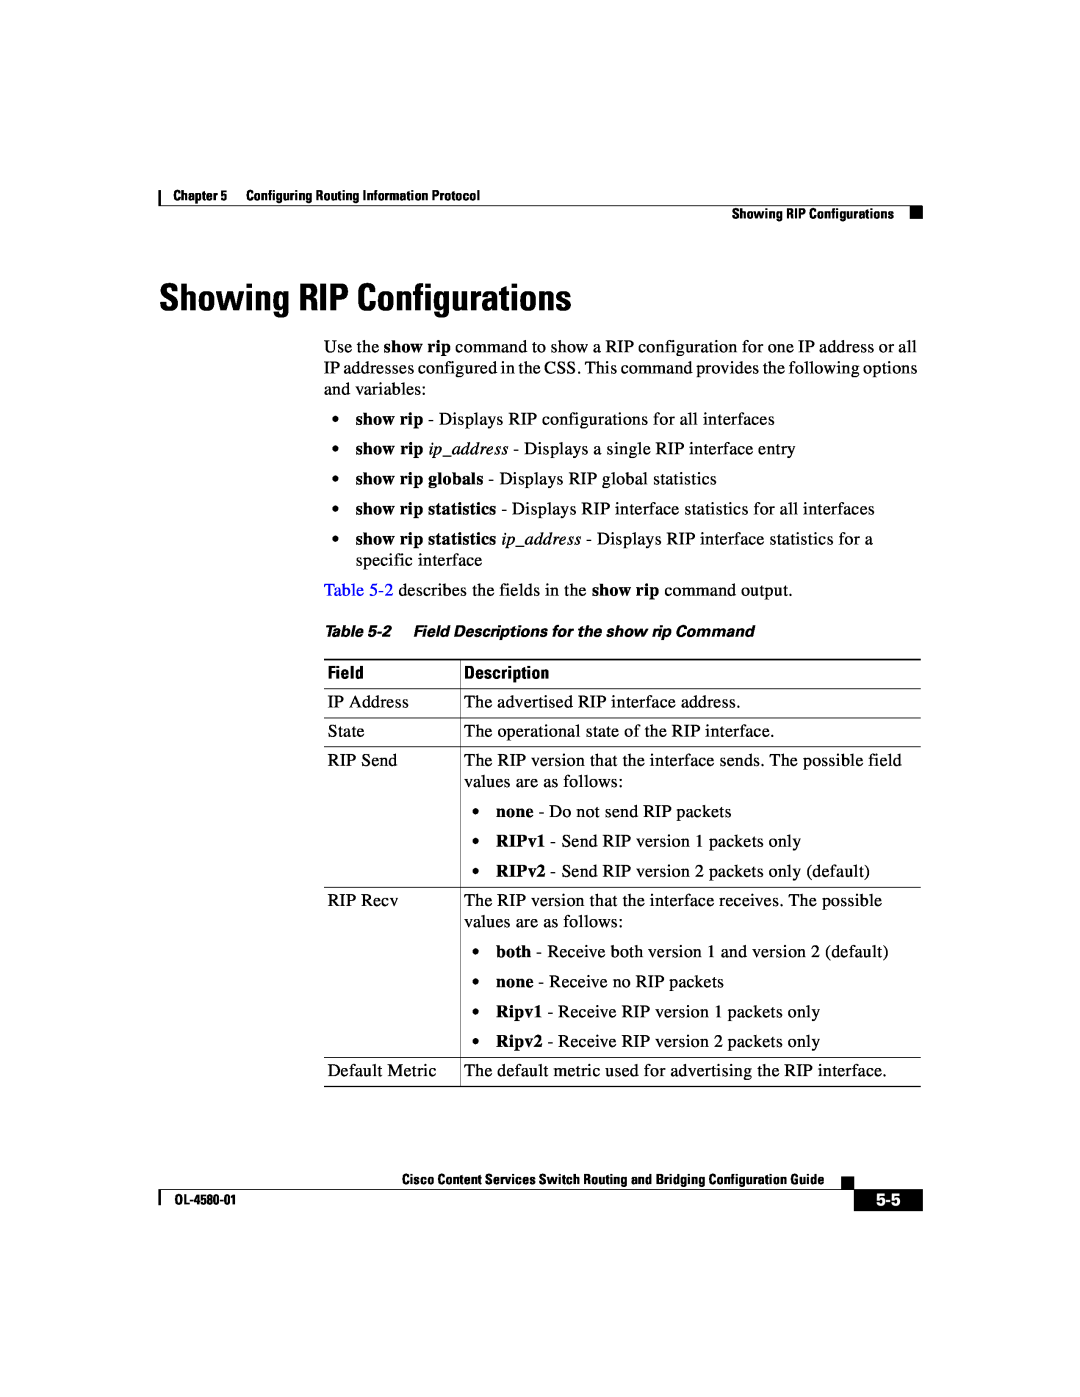 Cisco Systems OL-4580-01 manual Showing RIP Configurations, 2 Field Descriptions for the show rip Command 